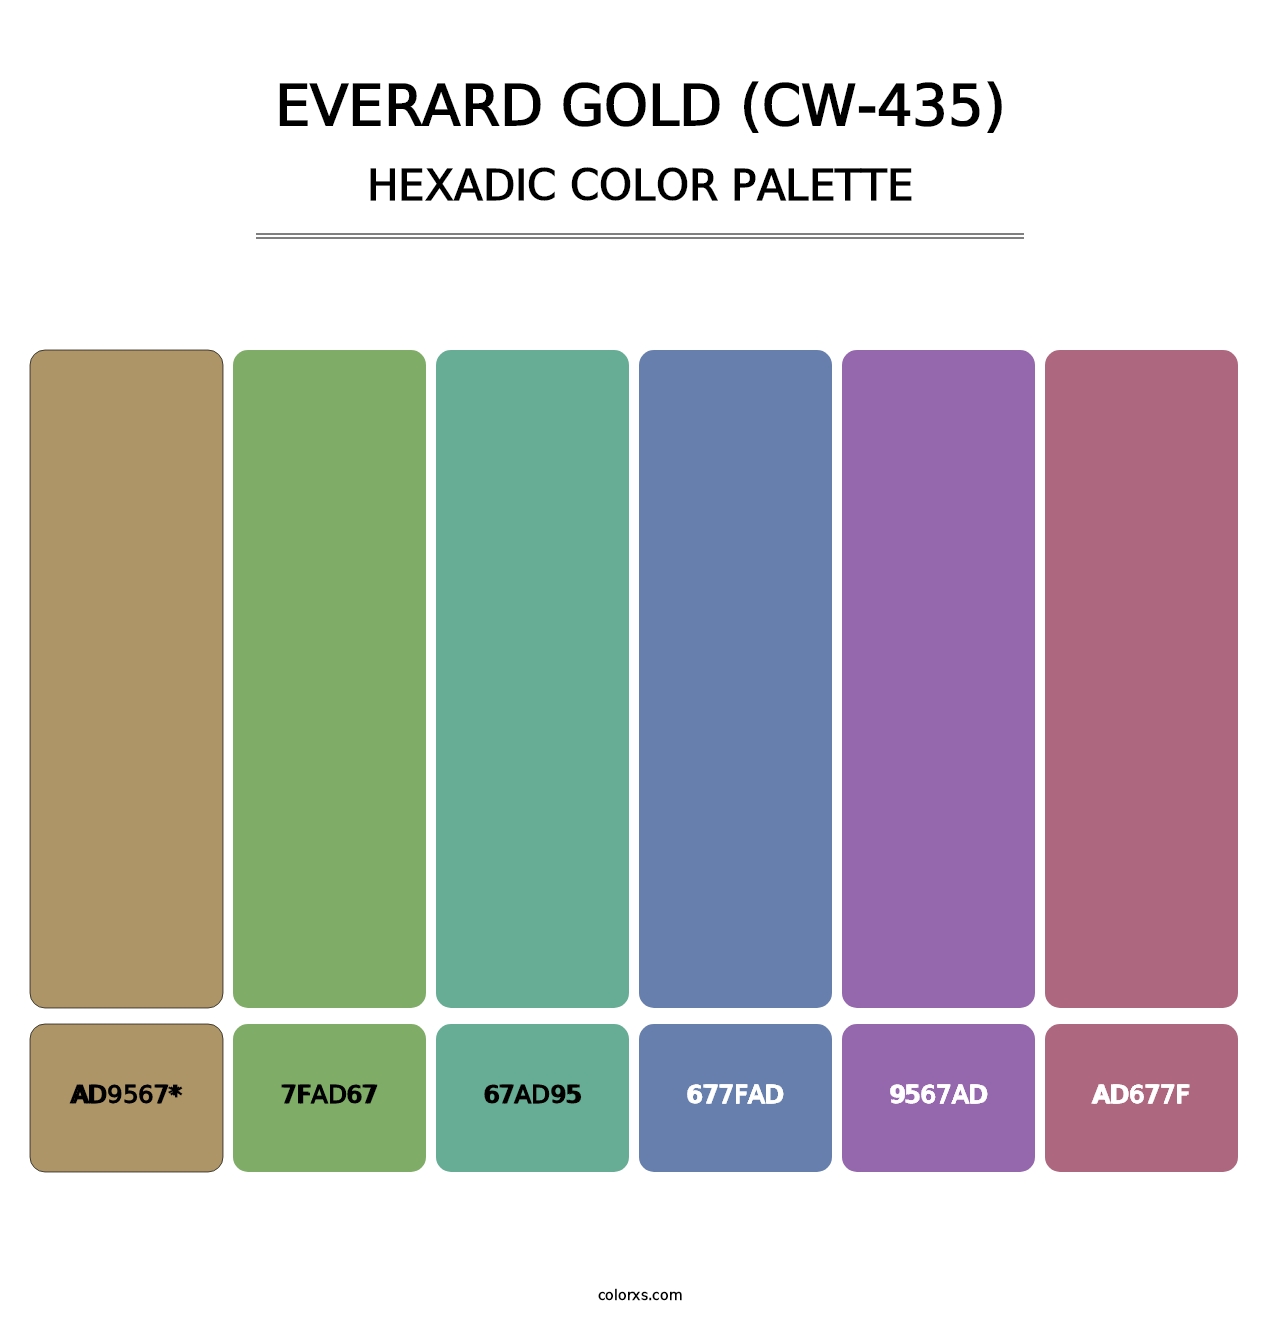 Everard Gold (CW-435) - Hexadic Color Palette